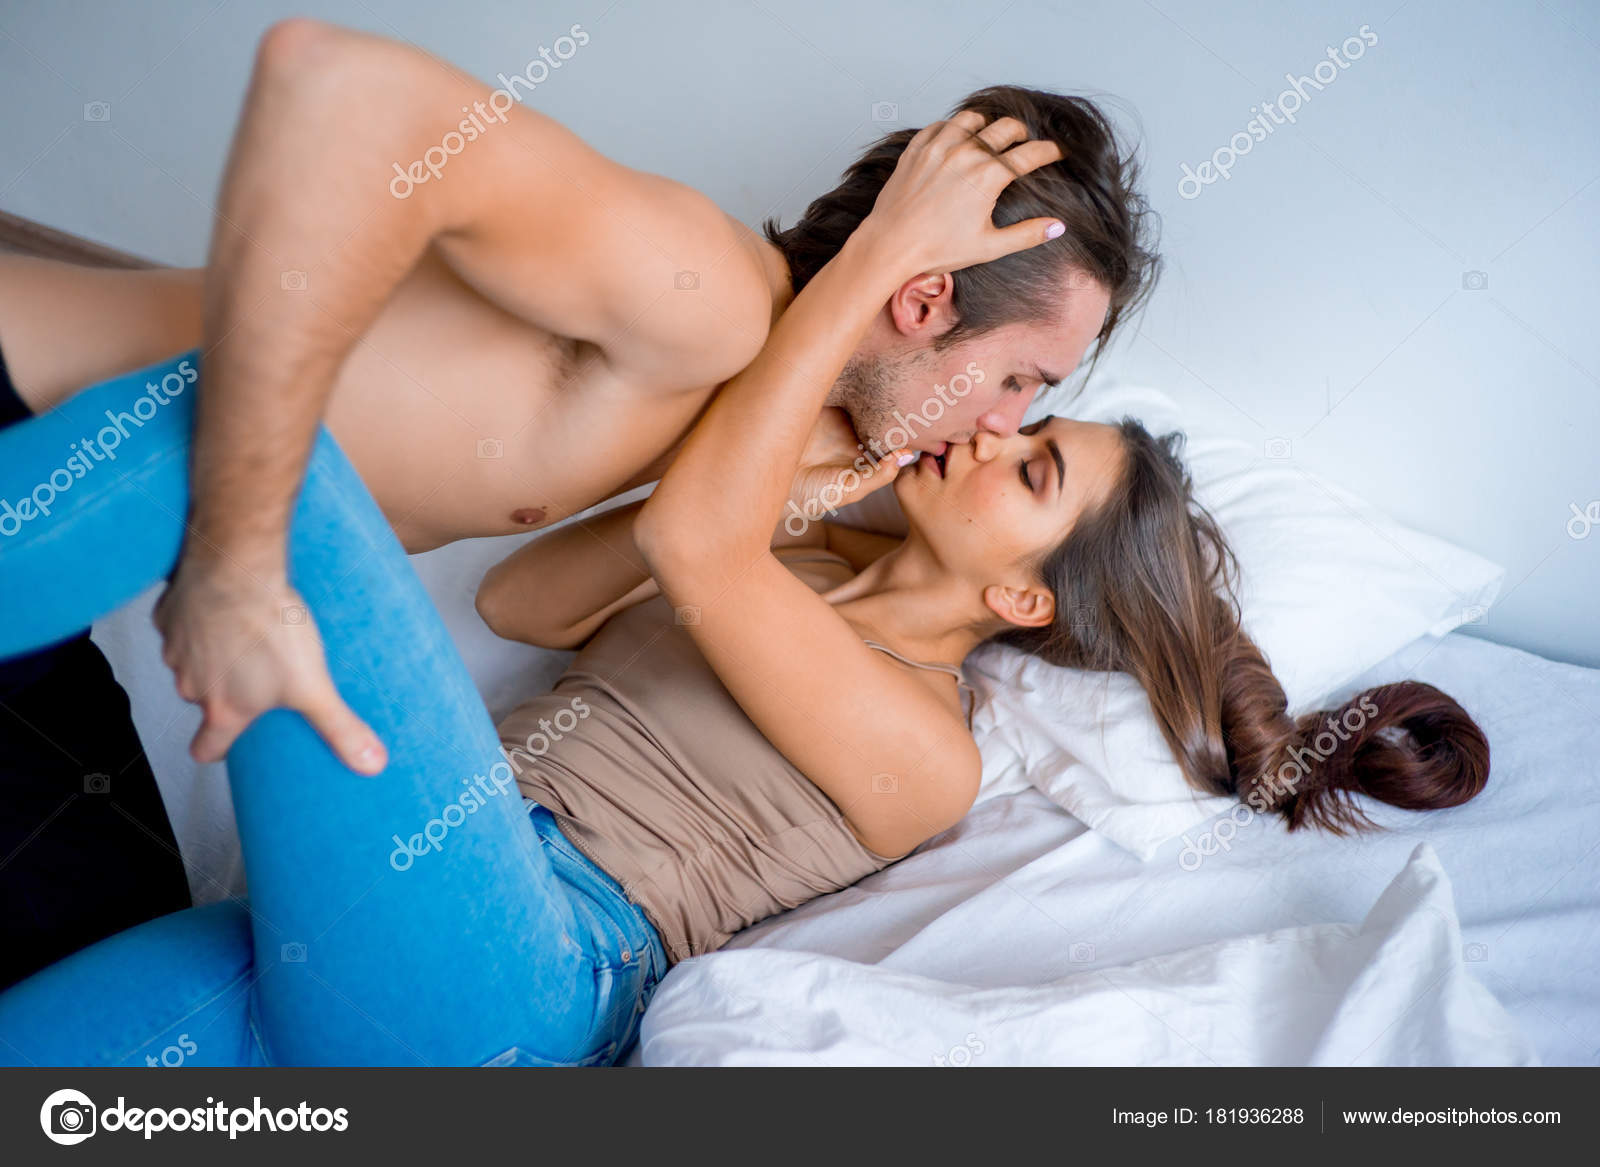 married couples having sex free photos